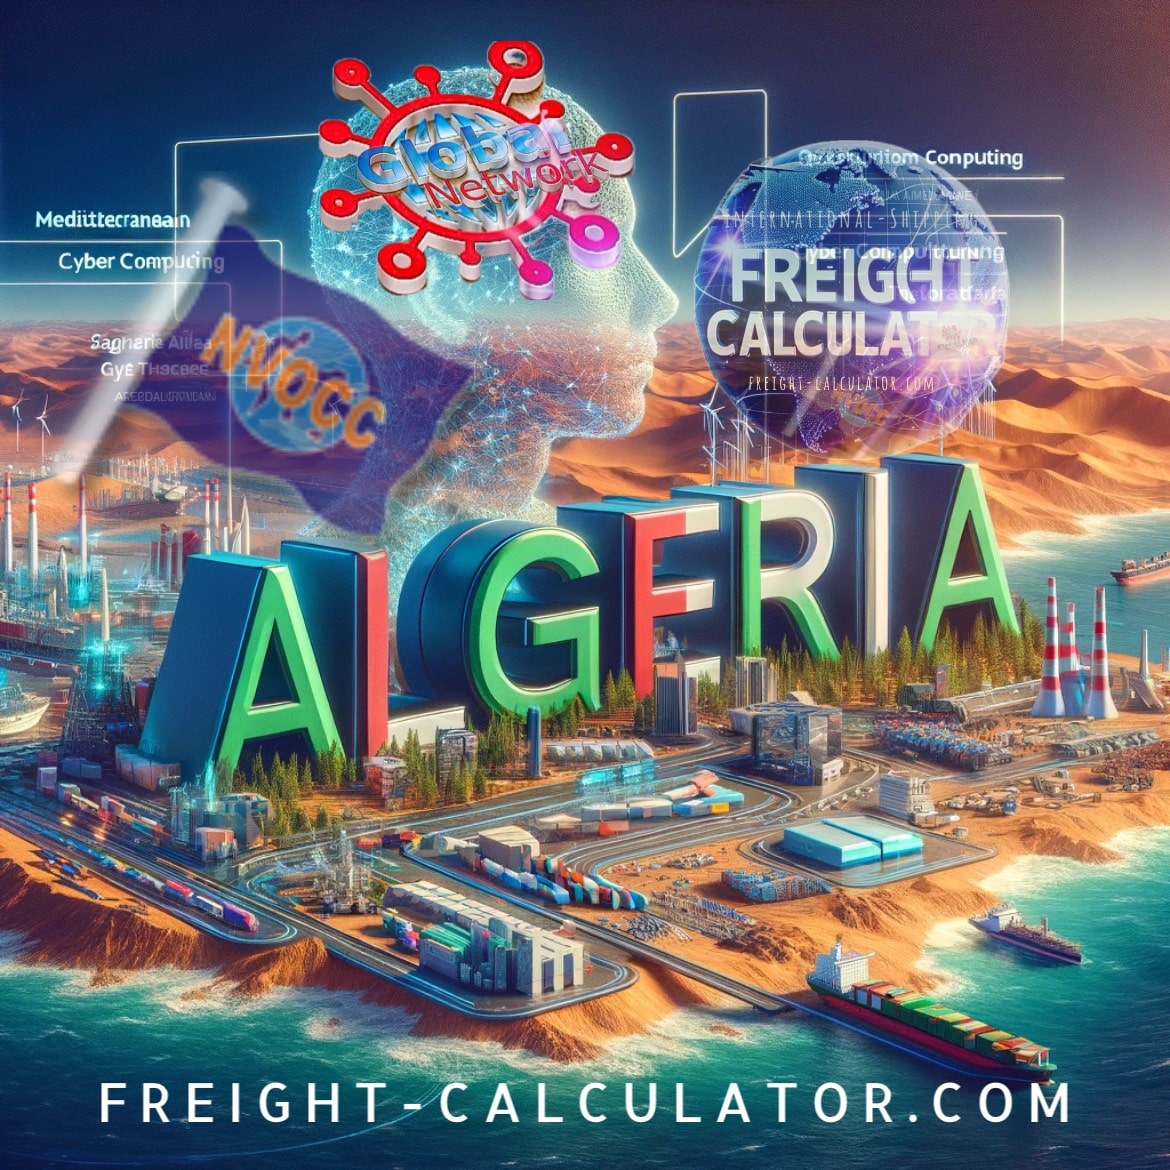 Shipping of Containers To Algeria